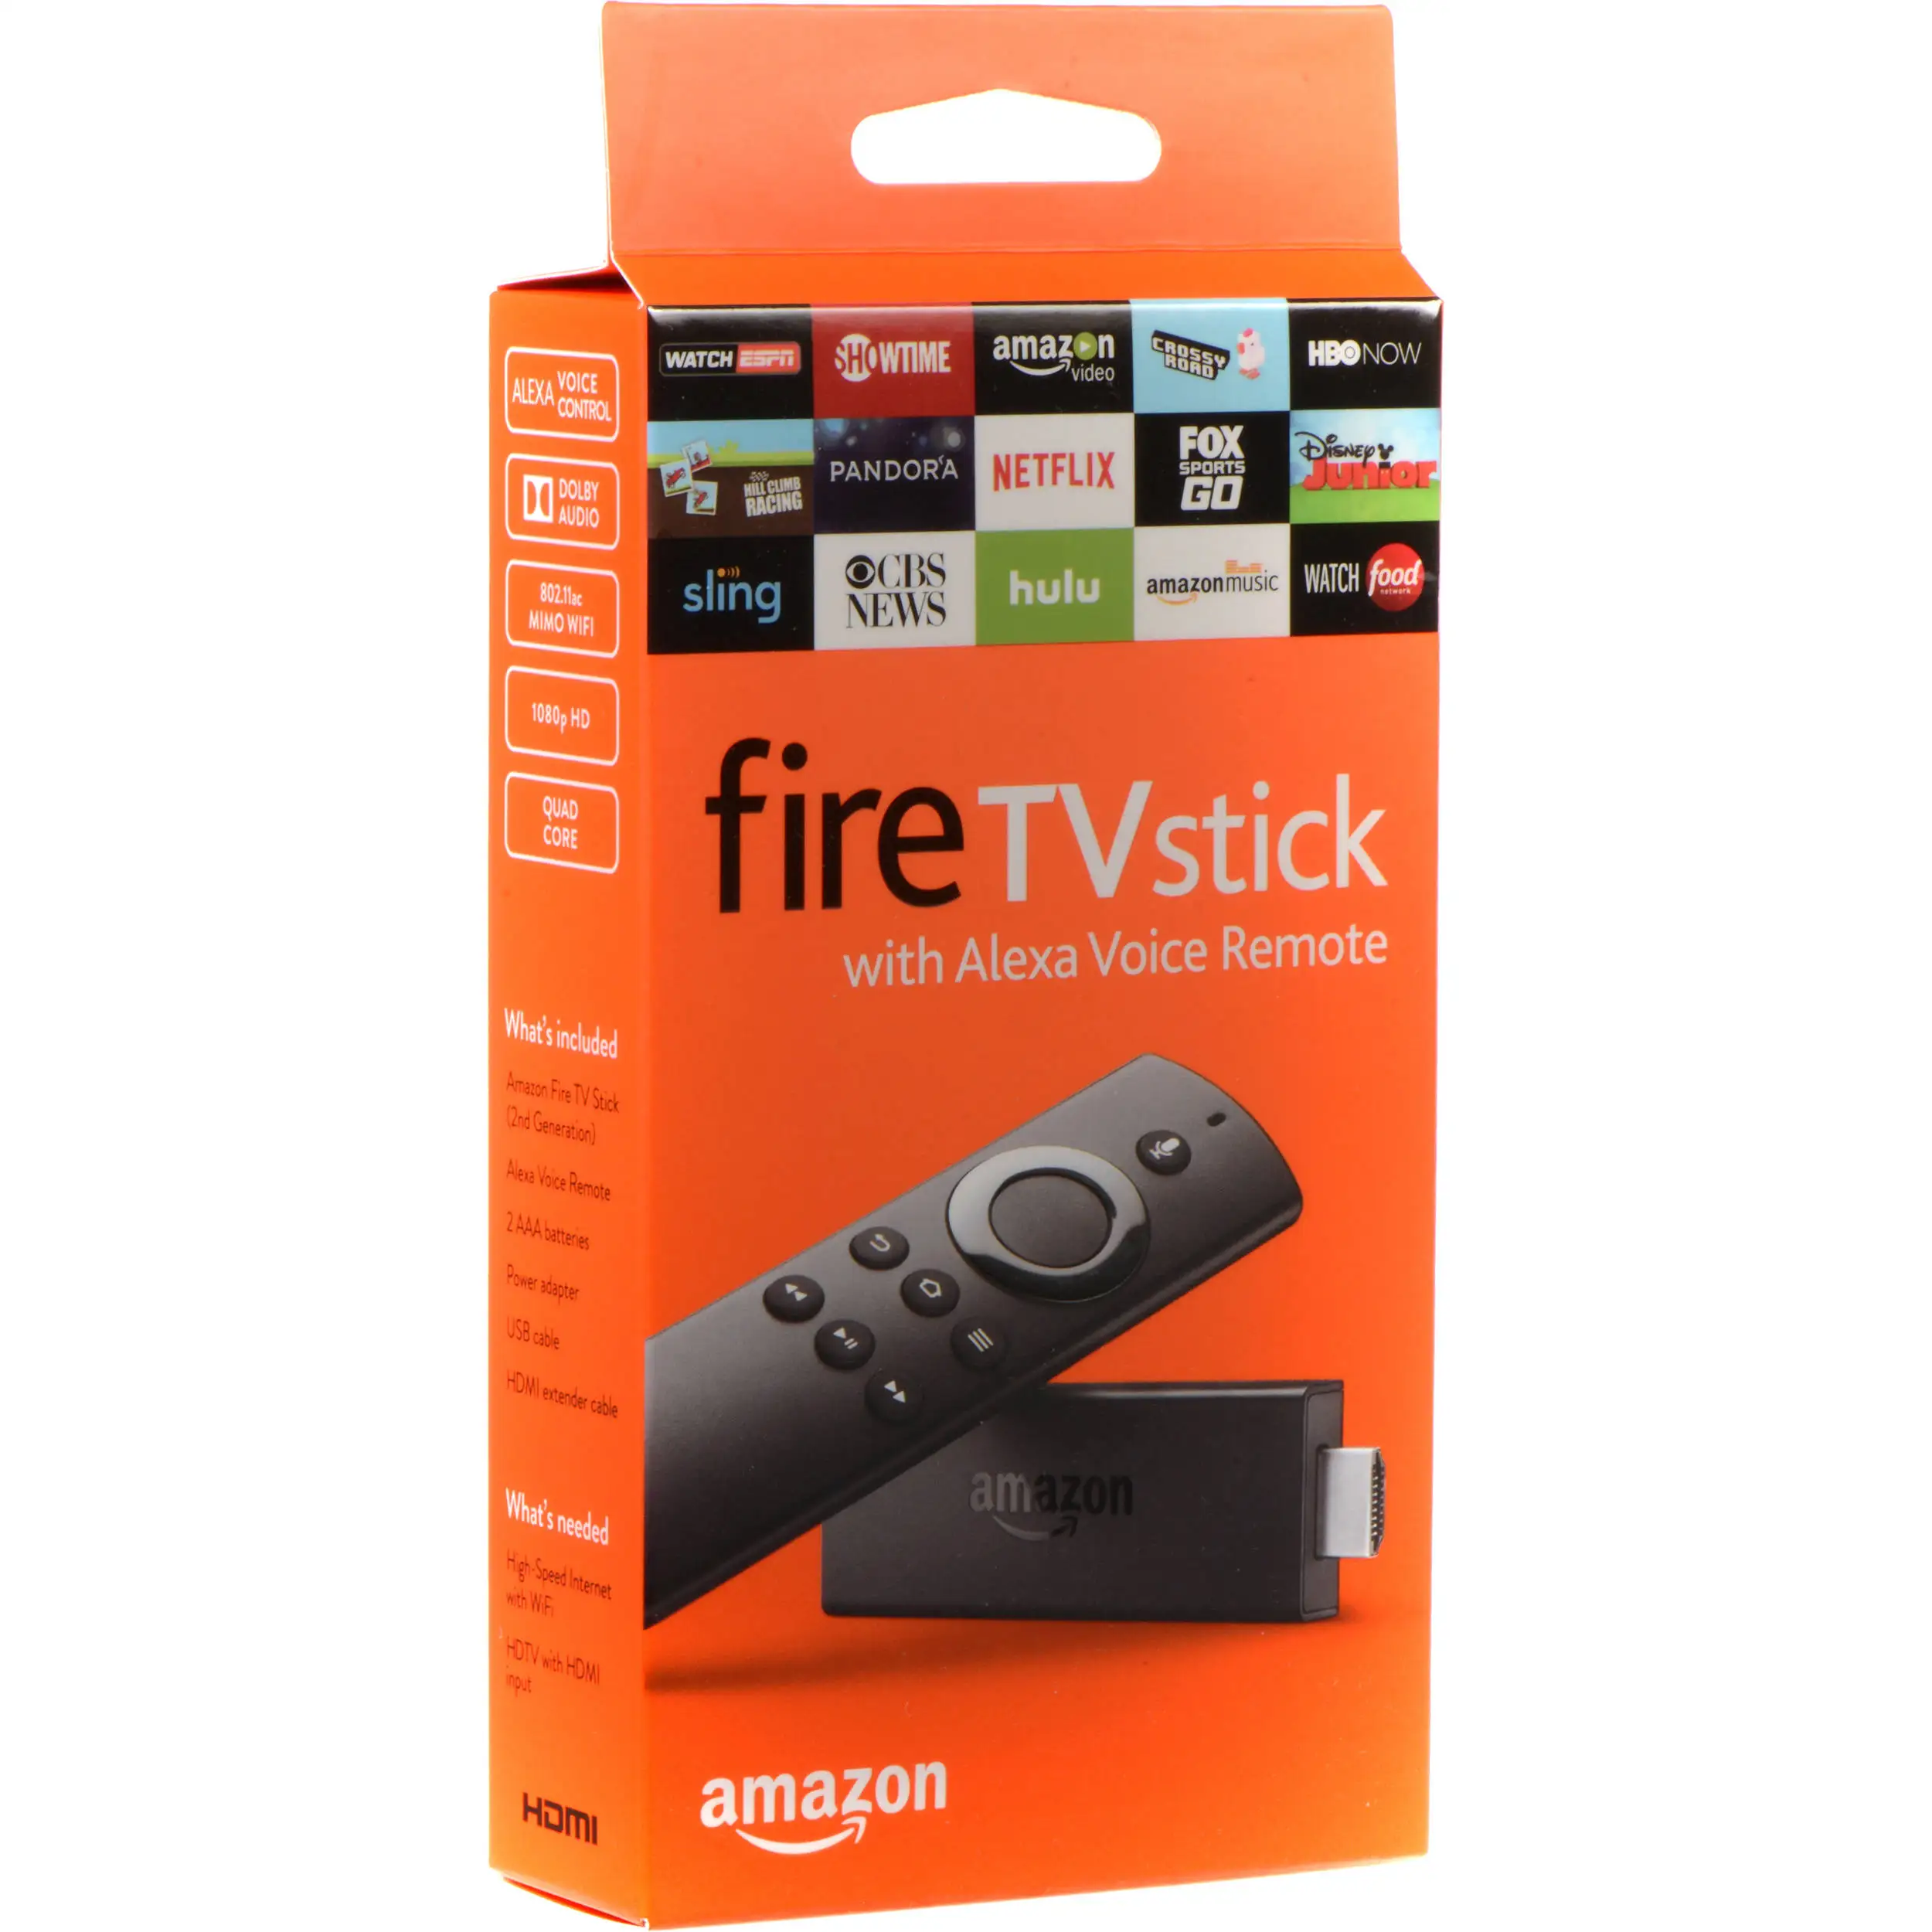 where can i buy the amazon fire tv stick